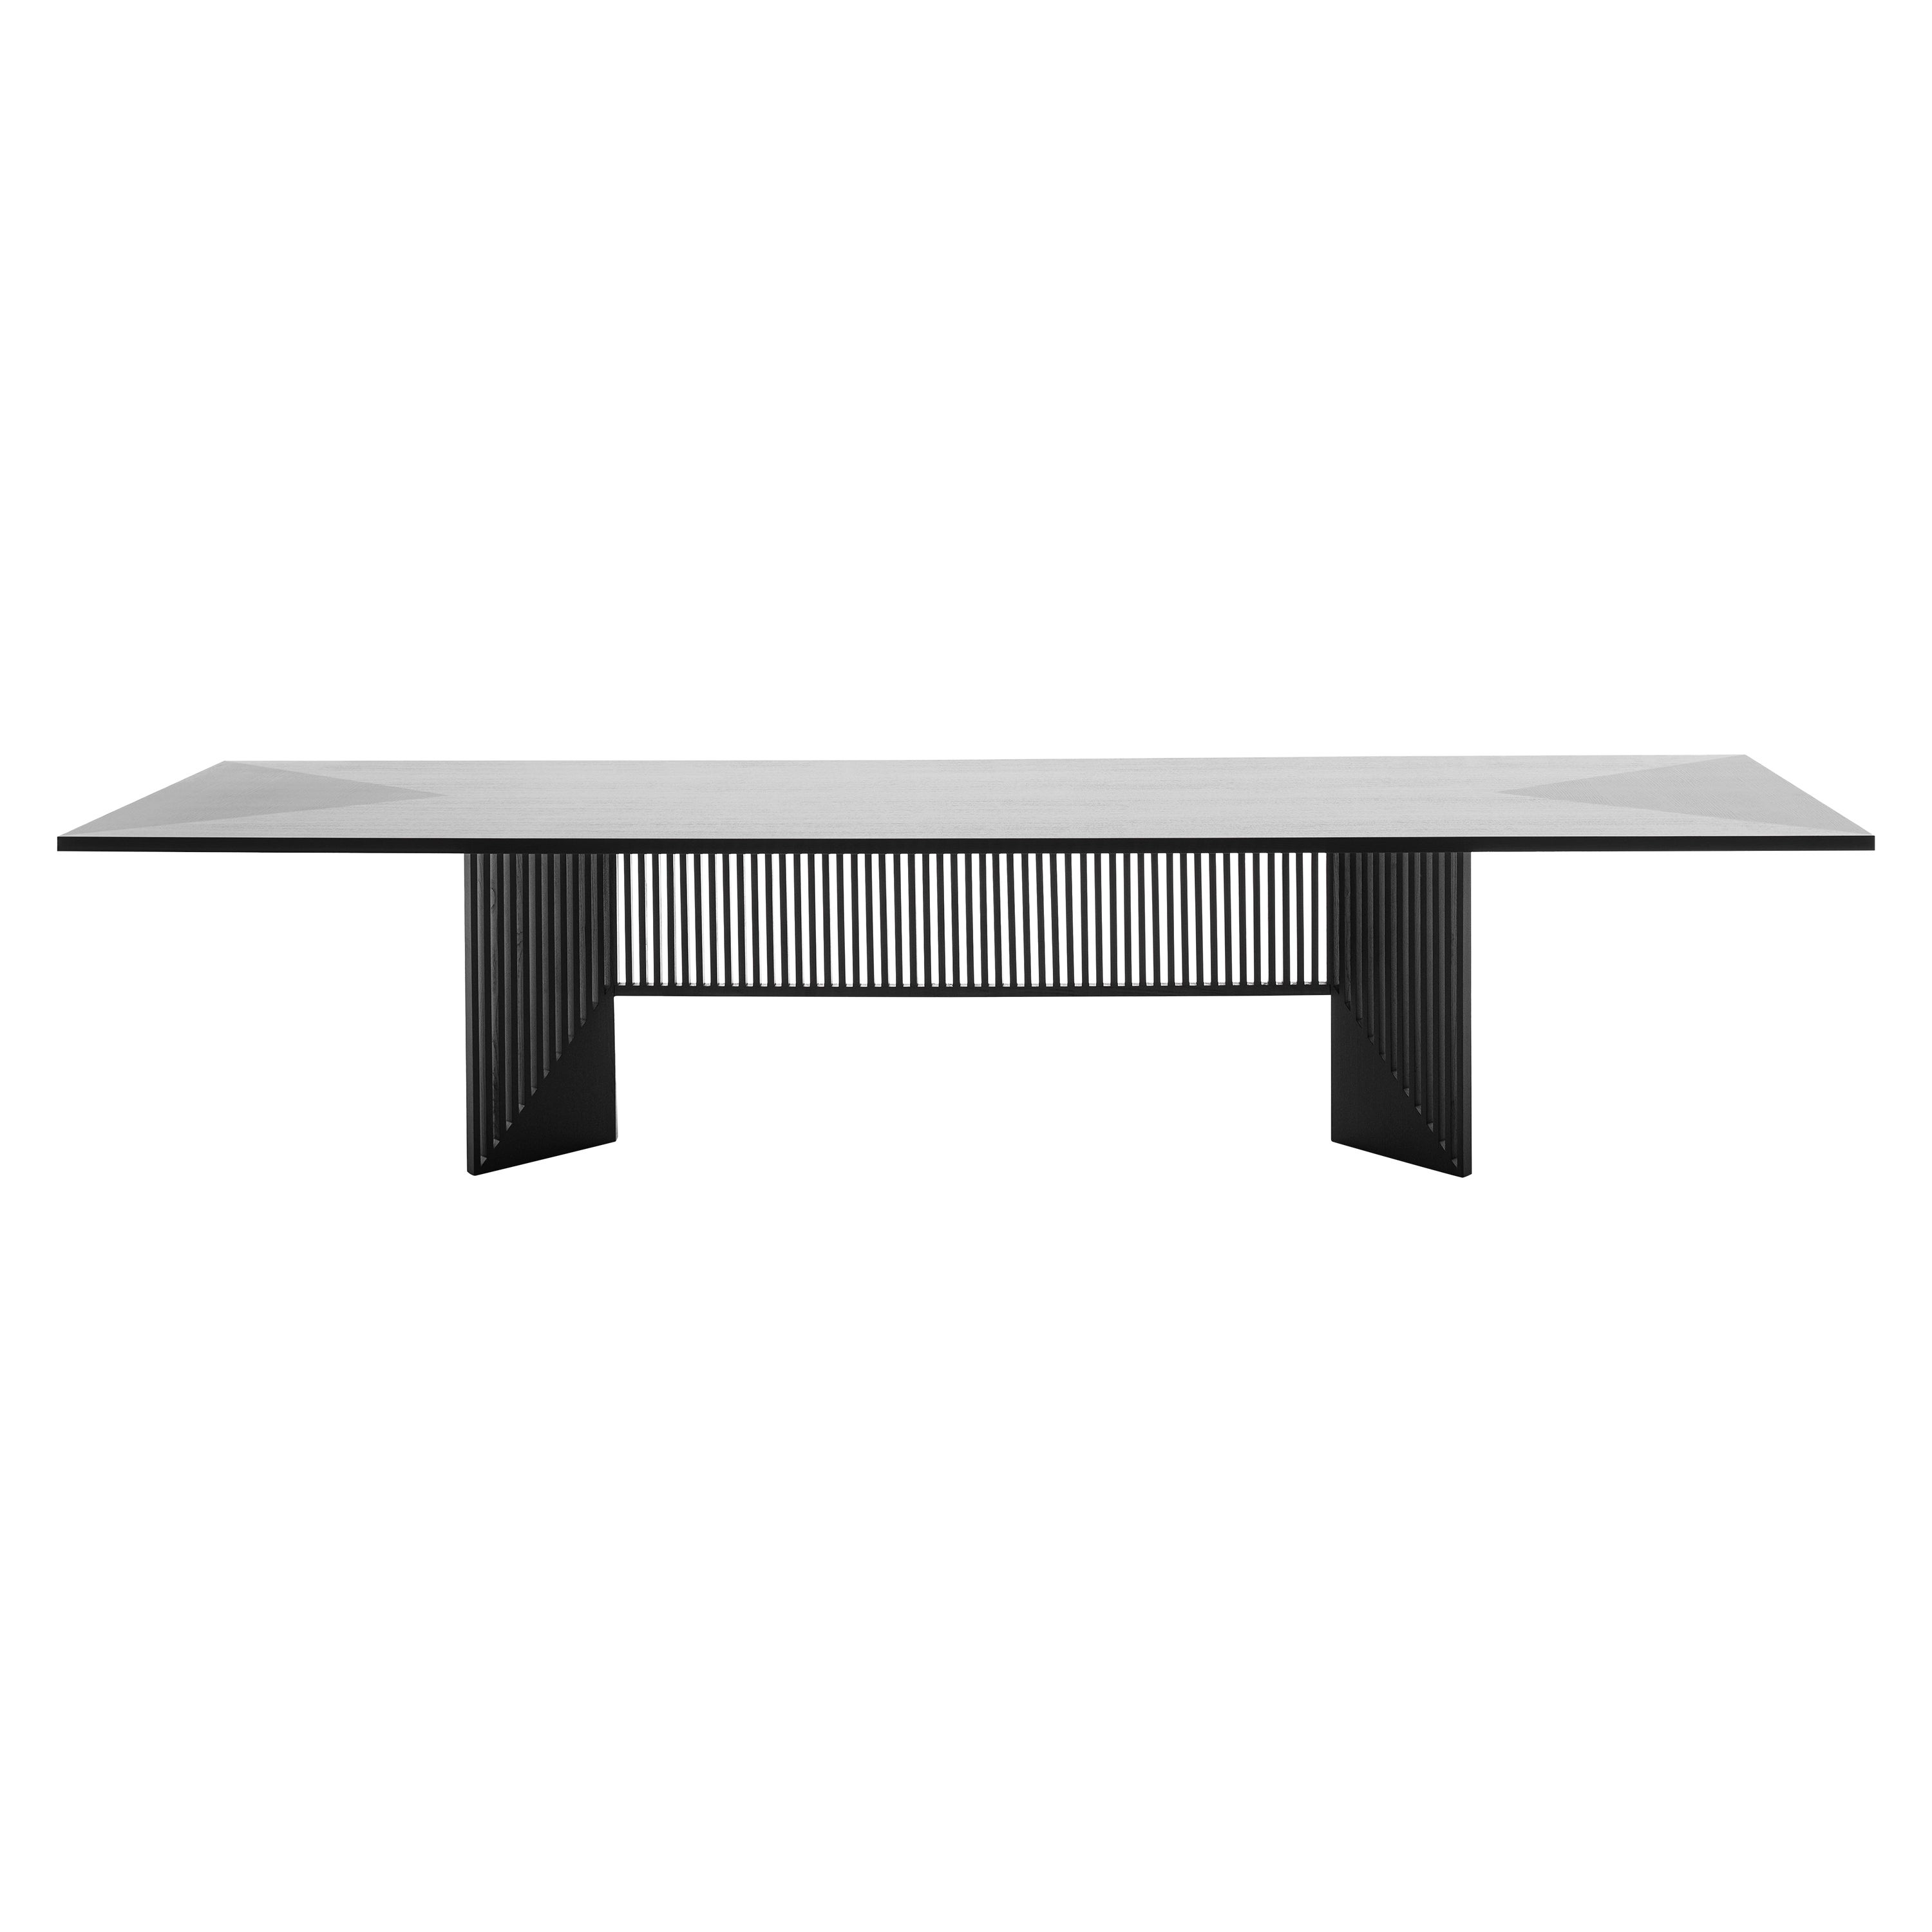 Acerbis Large Maestro Table in Black Ash Wood by Gianfranco Frattini For Sale